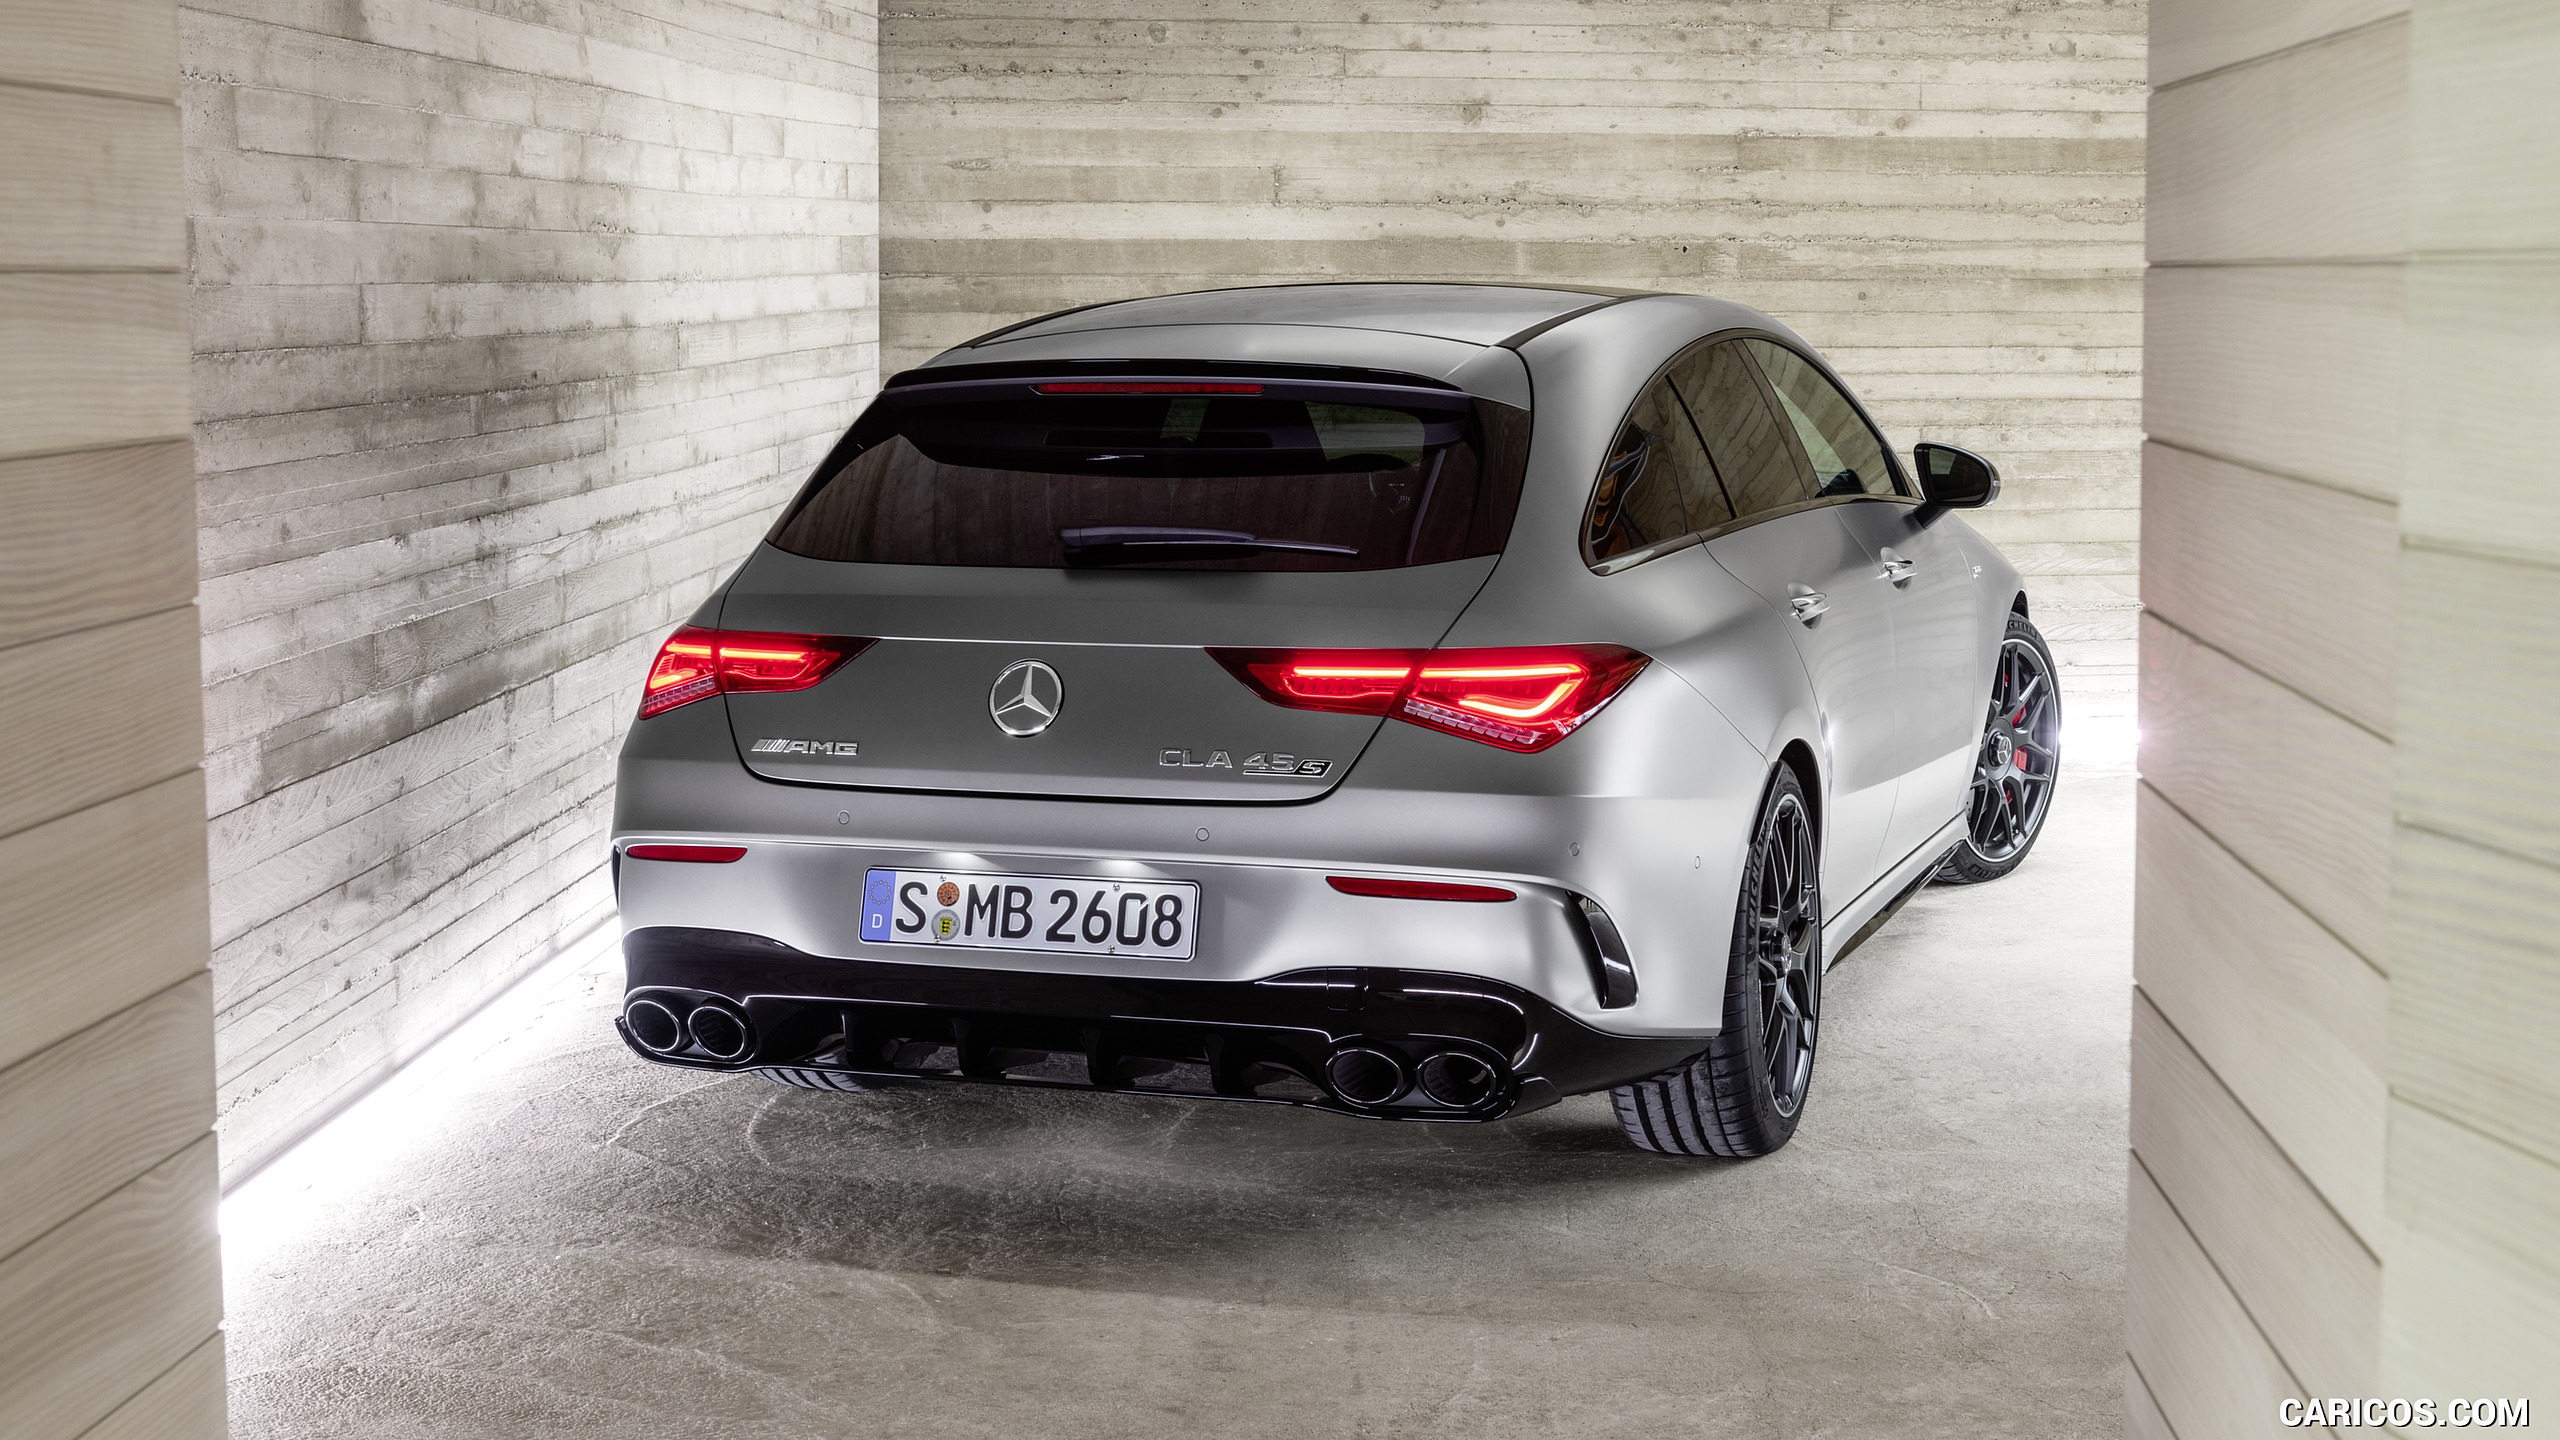 2020 Mercedes-AMG CLA 45 S 4MATIC+ Shooting Brake - Rear, #26 of 35